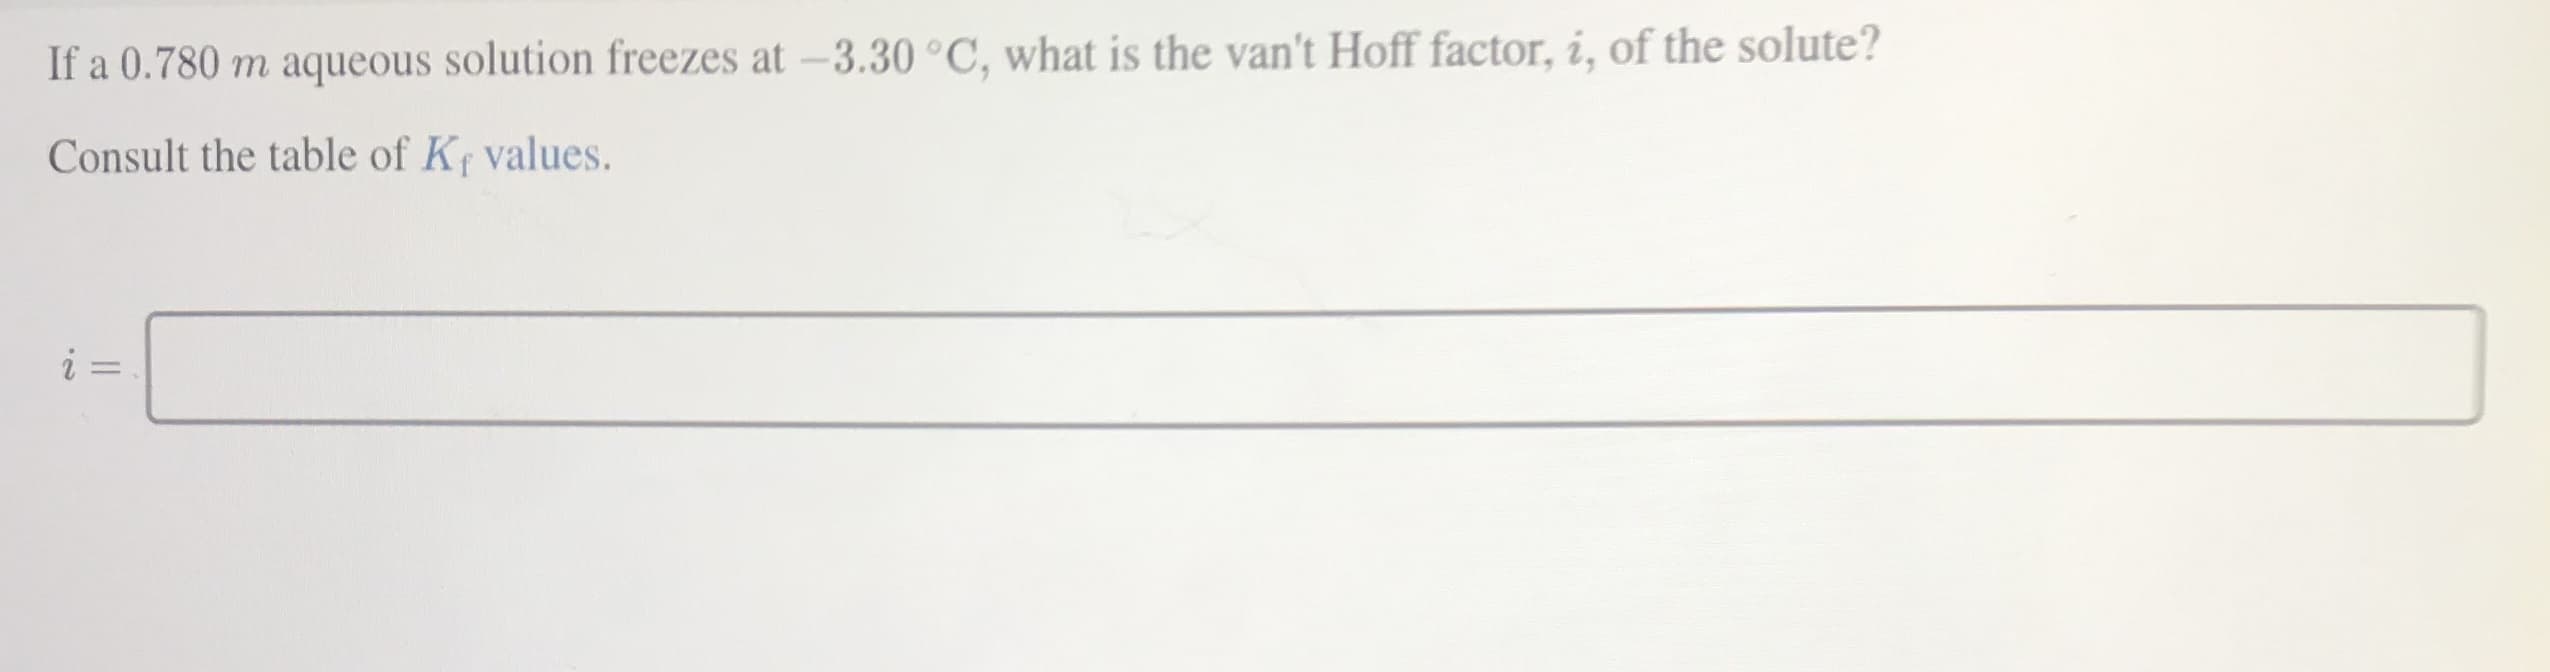 If a 0.780 m aqueous solution freezes at -3.30 °C, what is the van't Hoff factor, i, of the solute?
Consult the table of Kf values.
%3.
